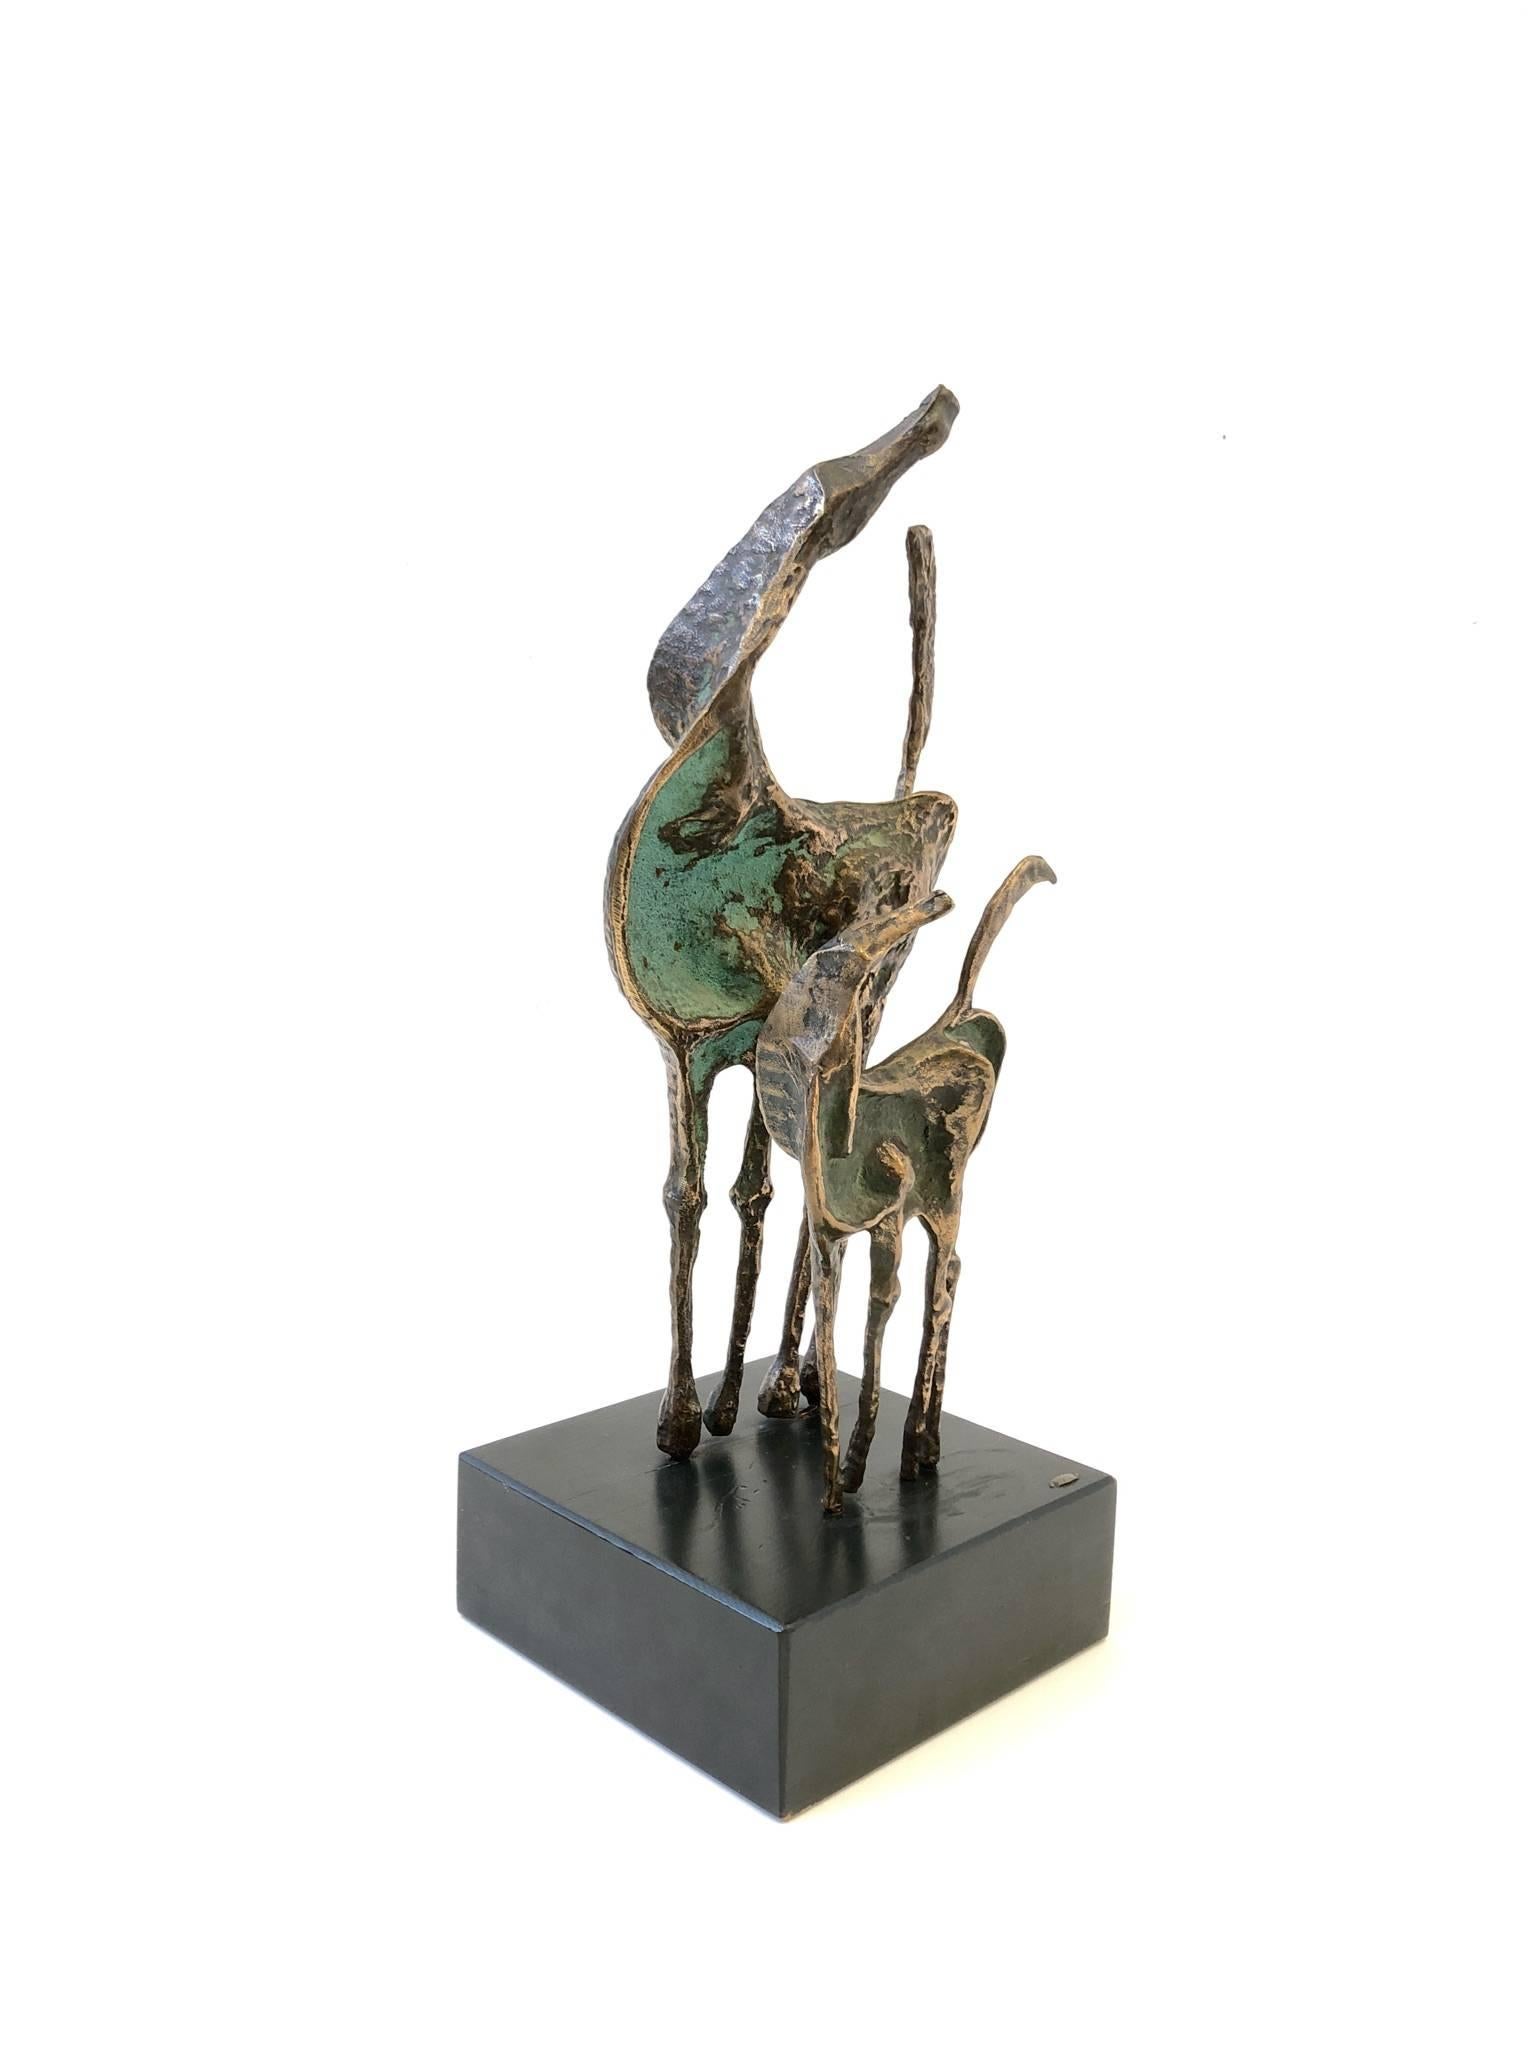 A beautiful 1970s cast bronze horses sculpture by renowned designers Curtis Jerè.
The sculpture has a beautiful patina and its mounted on a wooden lacquer base. 
The sculpture is signed and dated 1970.

Dimensions: 23.25” high 11” wide 9”